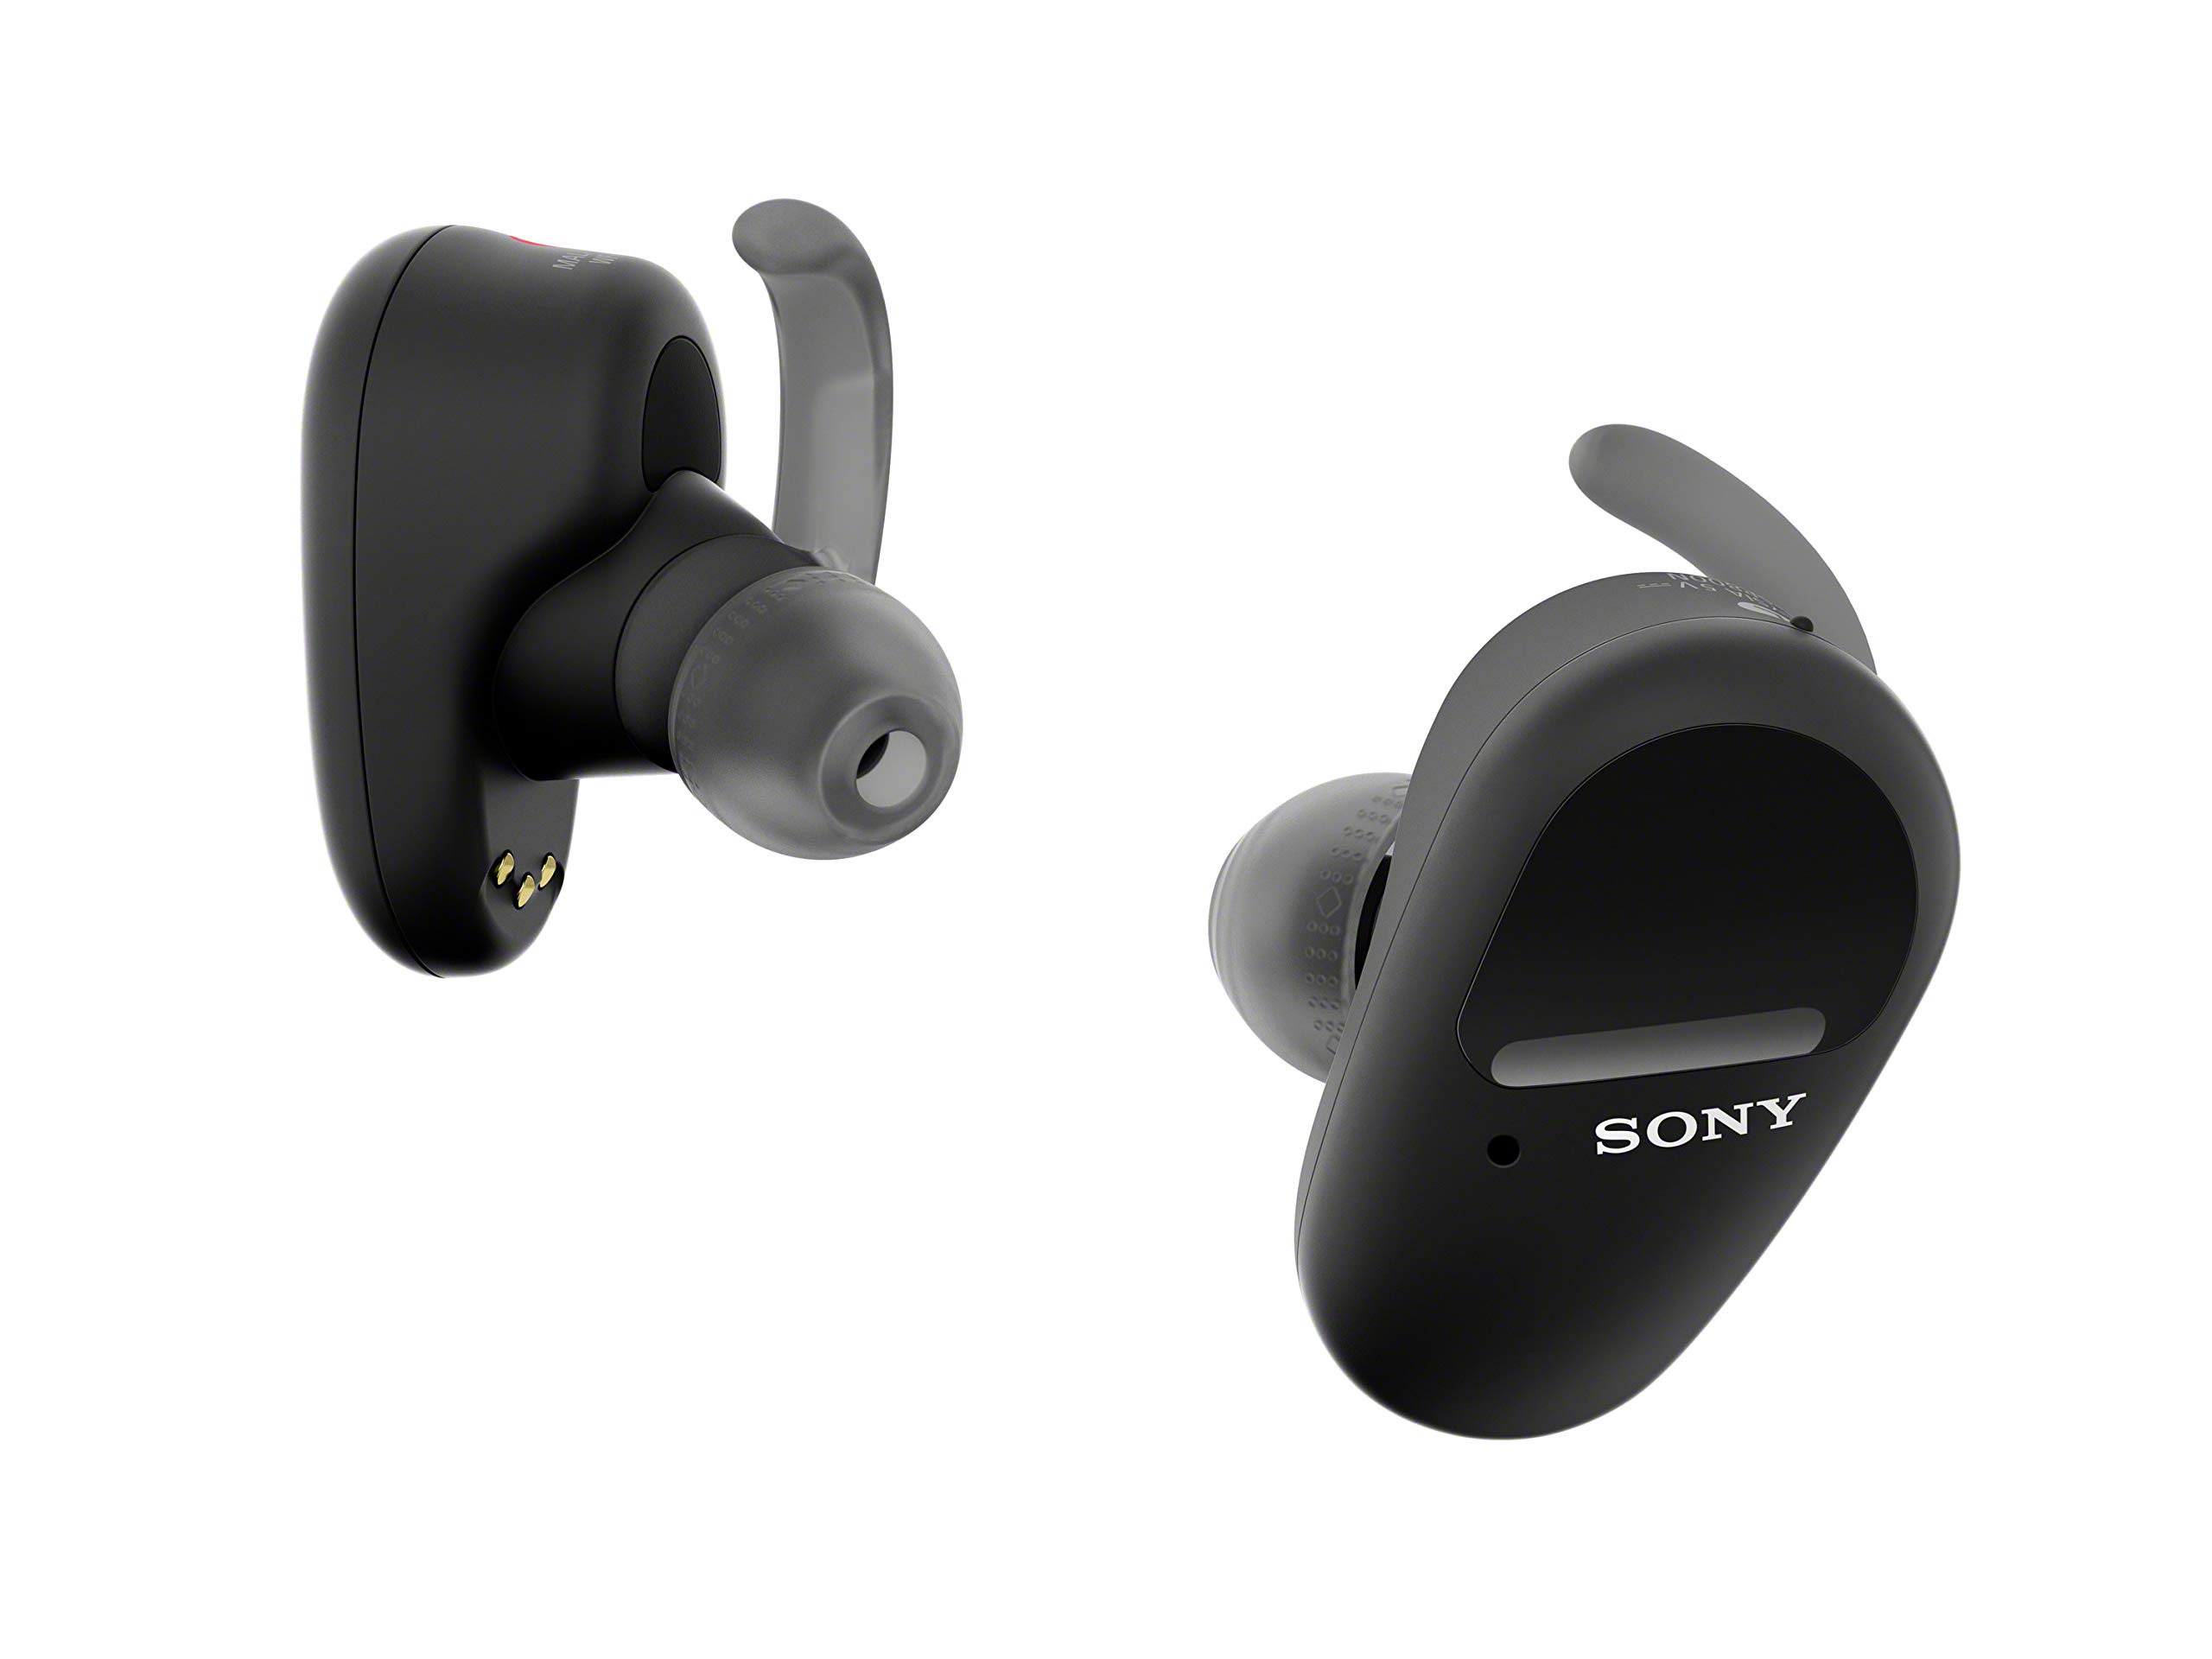 Sony WF-SP800N Truly Wireless Sports In-Ear Noise Canceling Headphones with Mic For Phone Call And Alexa Voice Control, Black (Renewed)